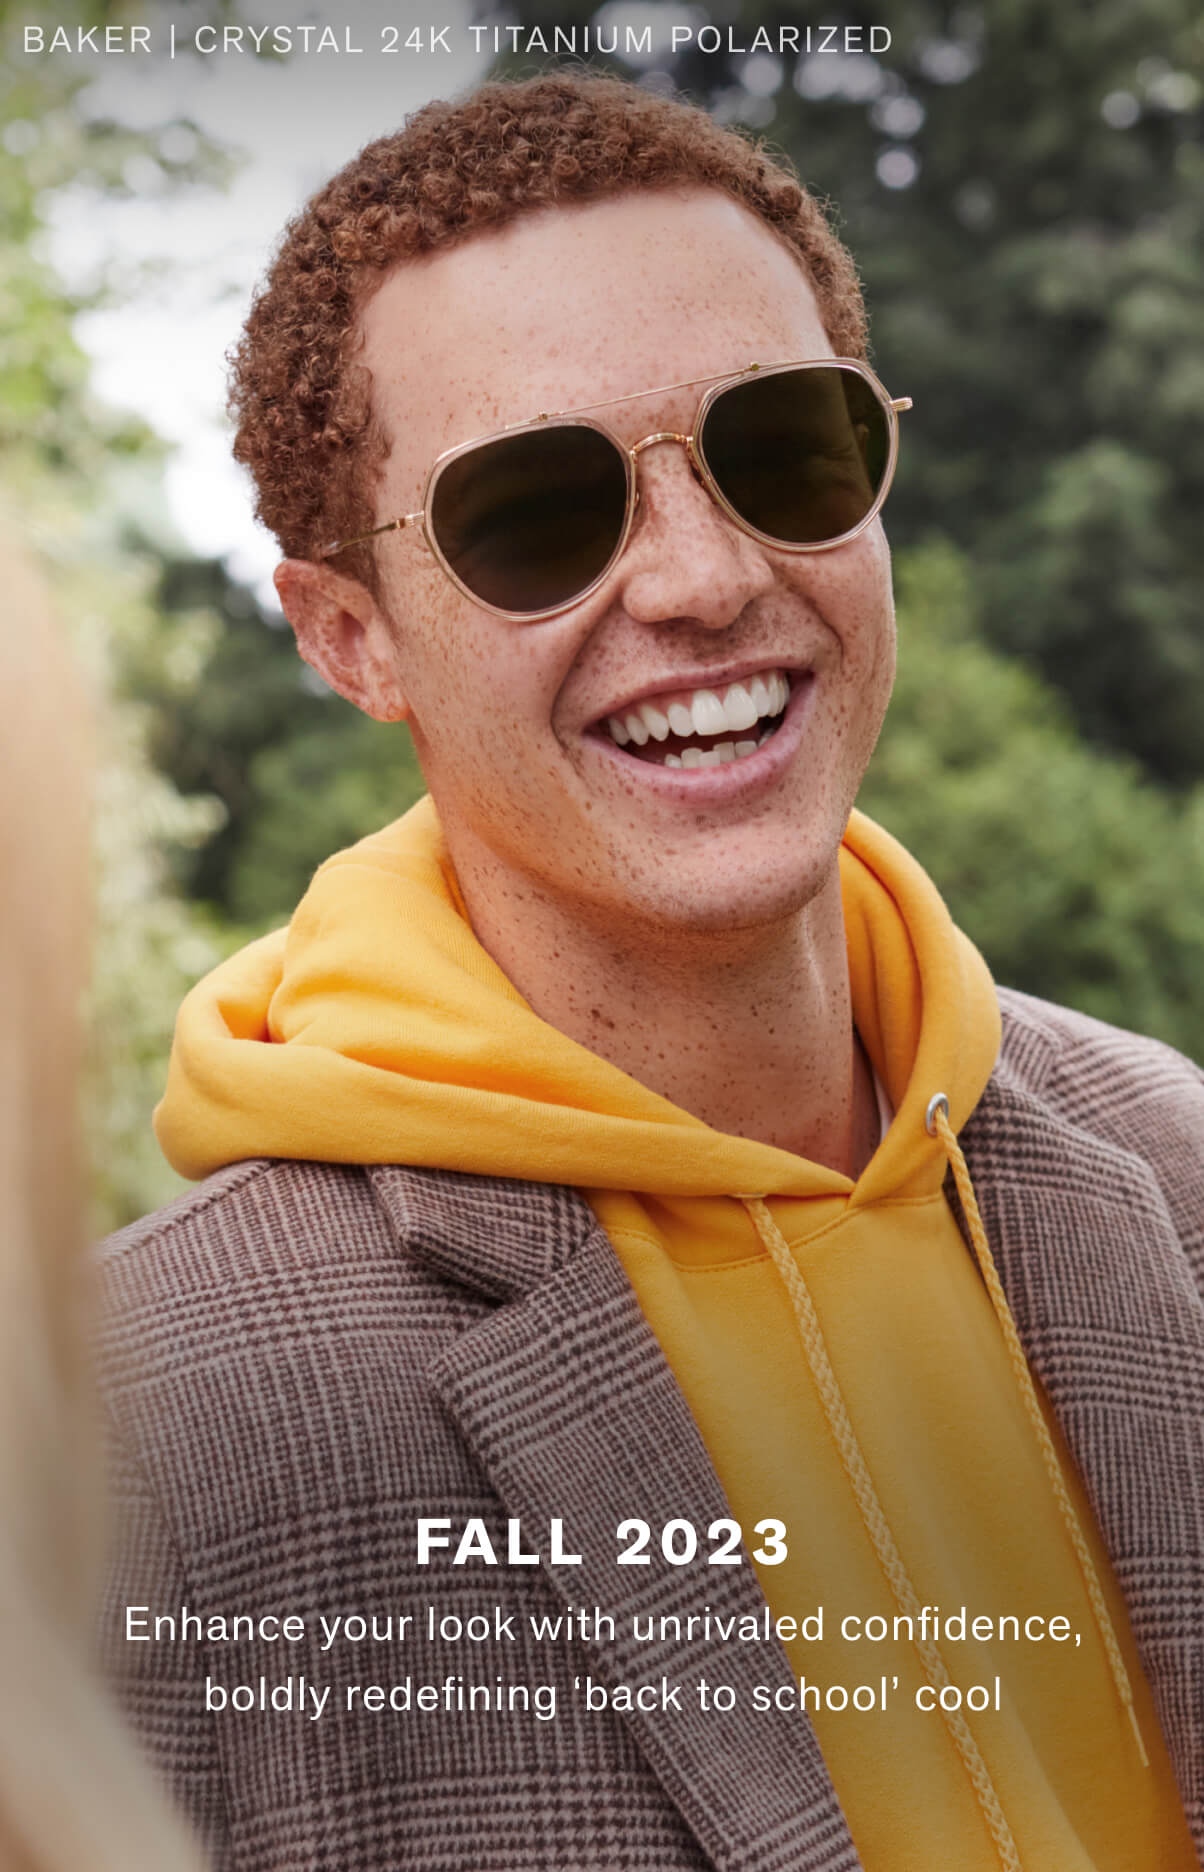 FALL 2023  Enhance your look with unrivaled confidence, boldy redefining 'back to school' cool